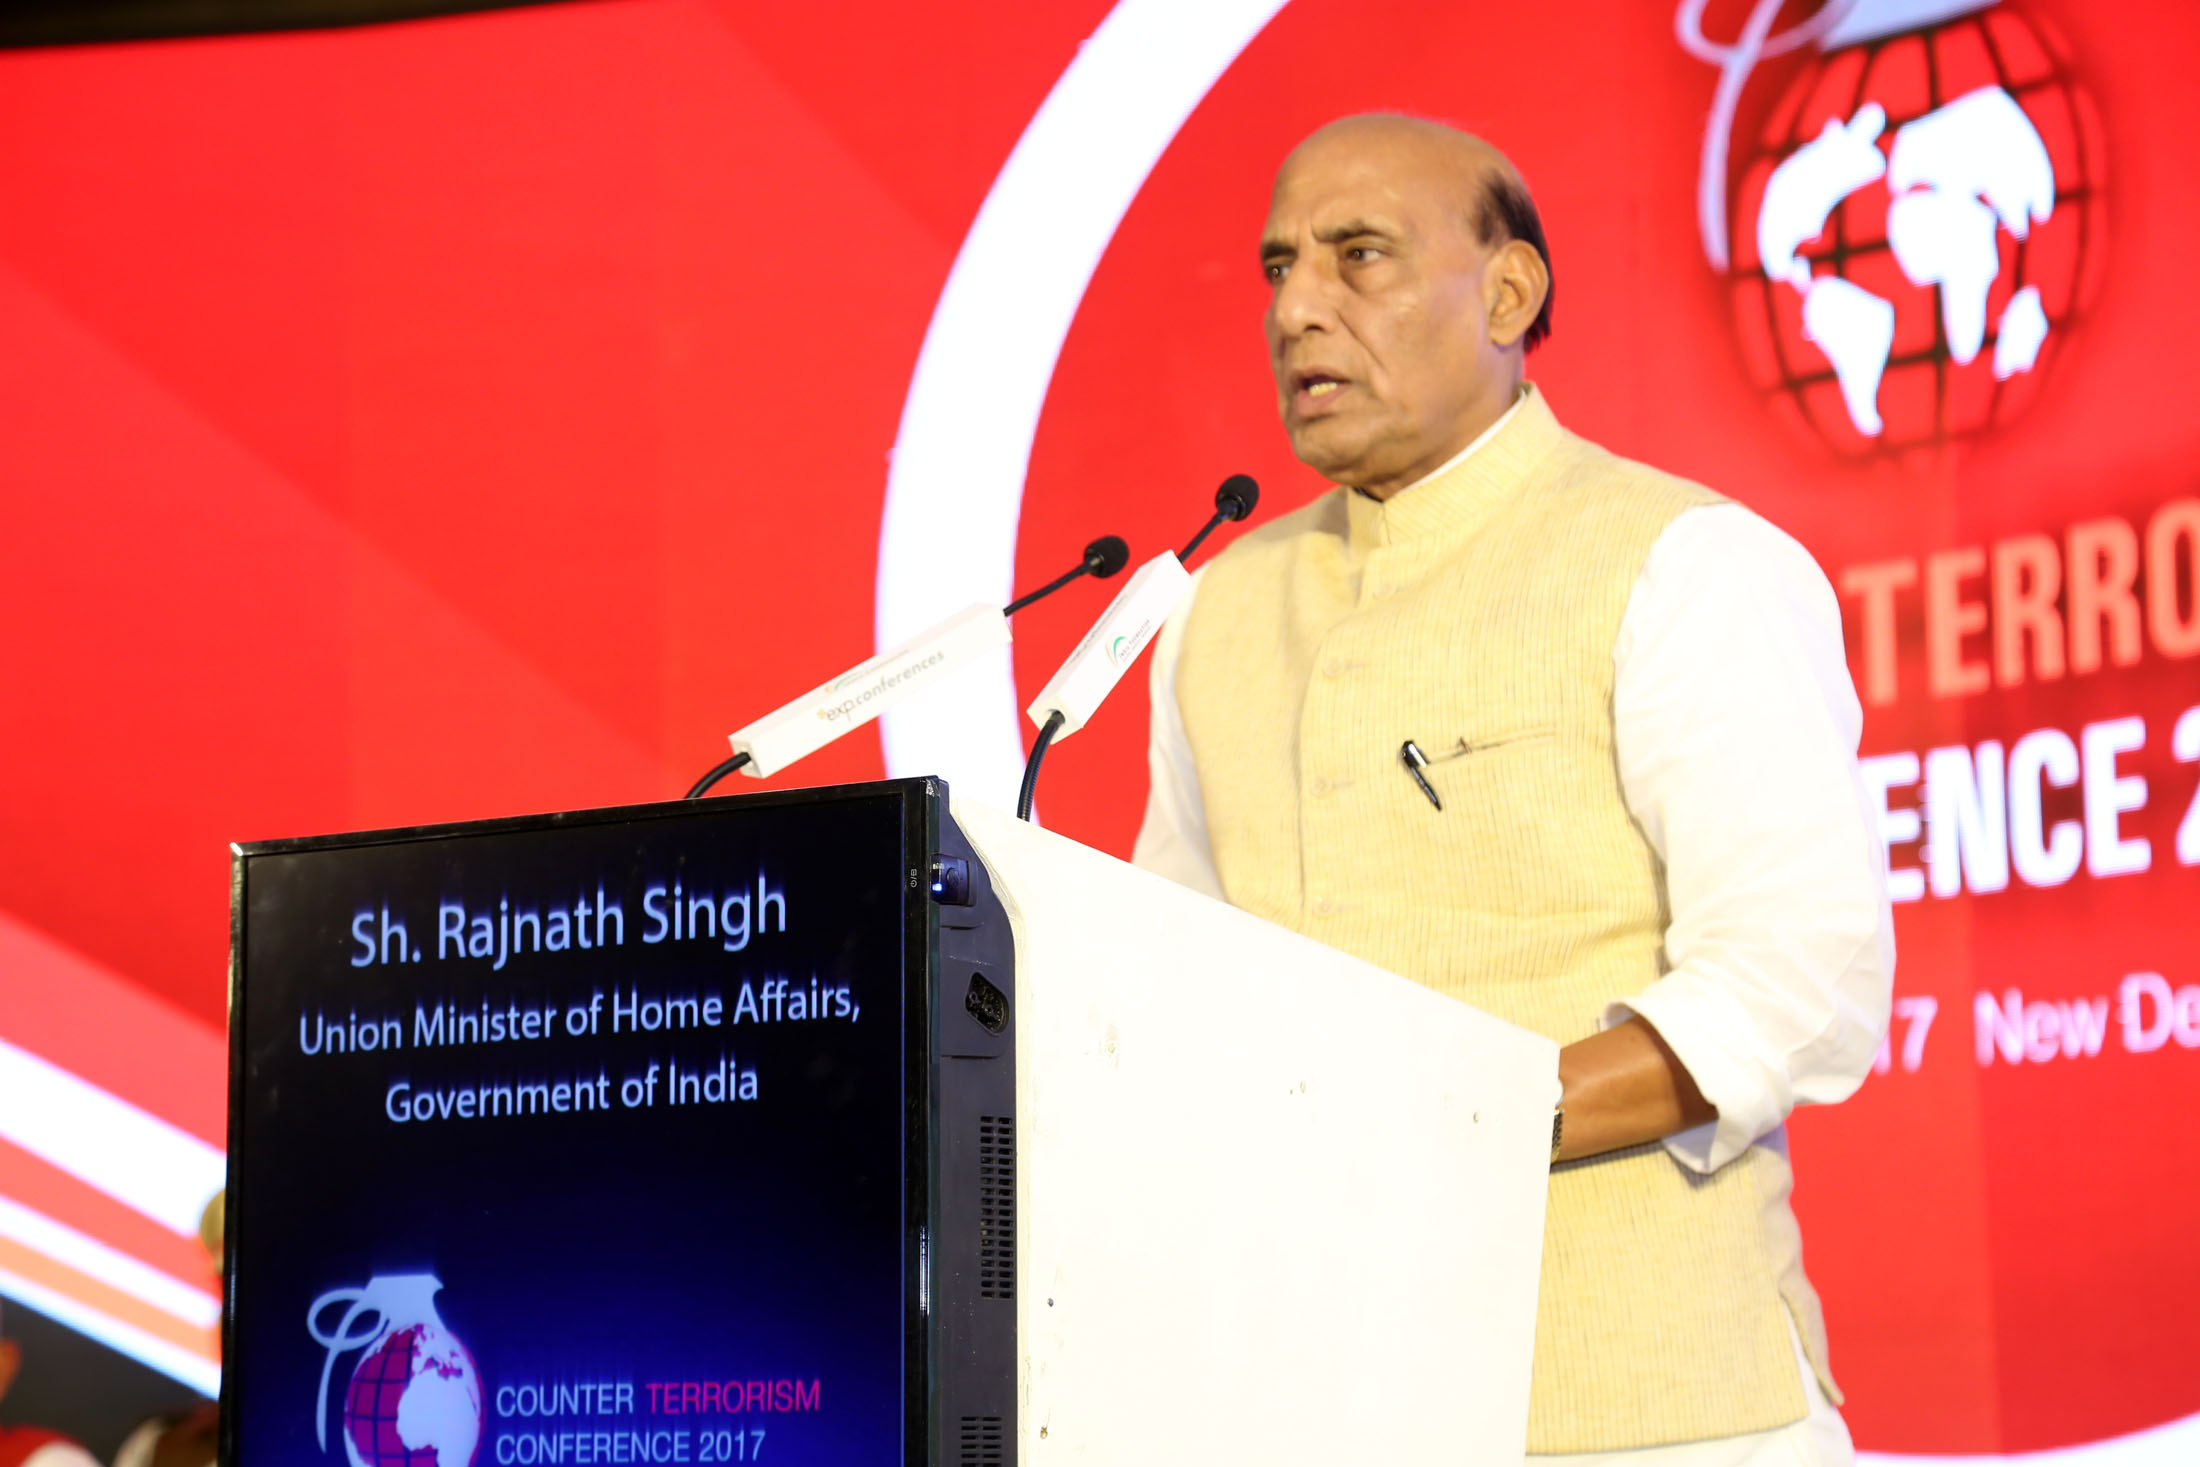 The Union Home Minister, Shri Rajnath Singh addressing at the Counter Terrorism Conference, in New Delhi on March 16, 2017.